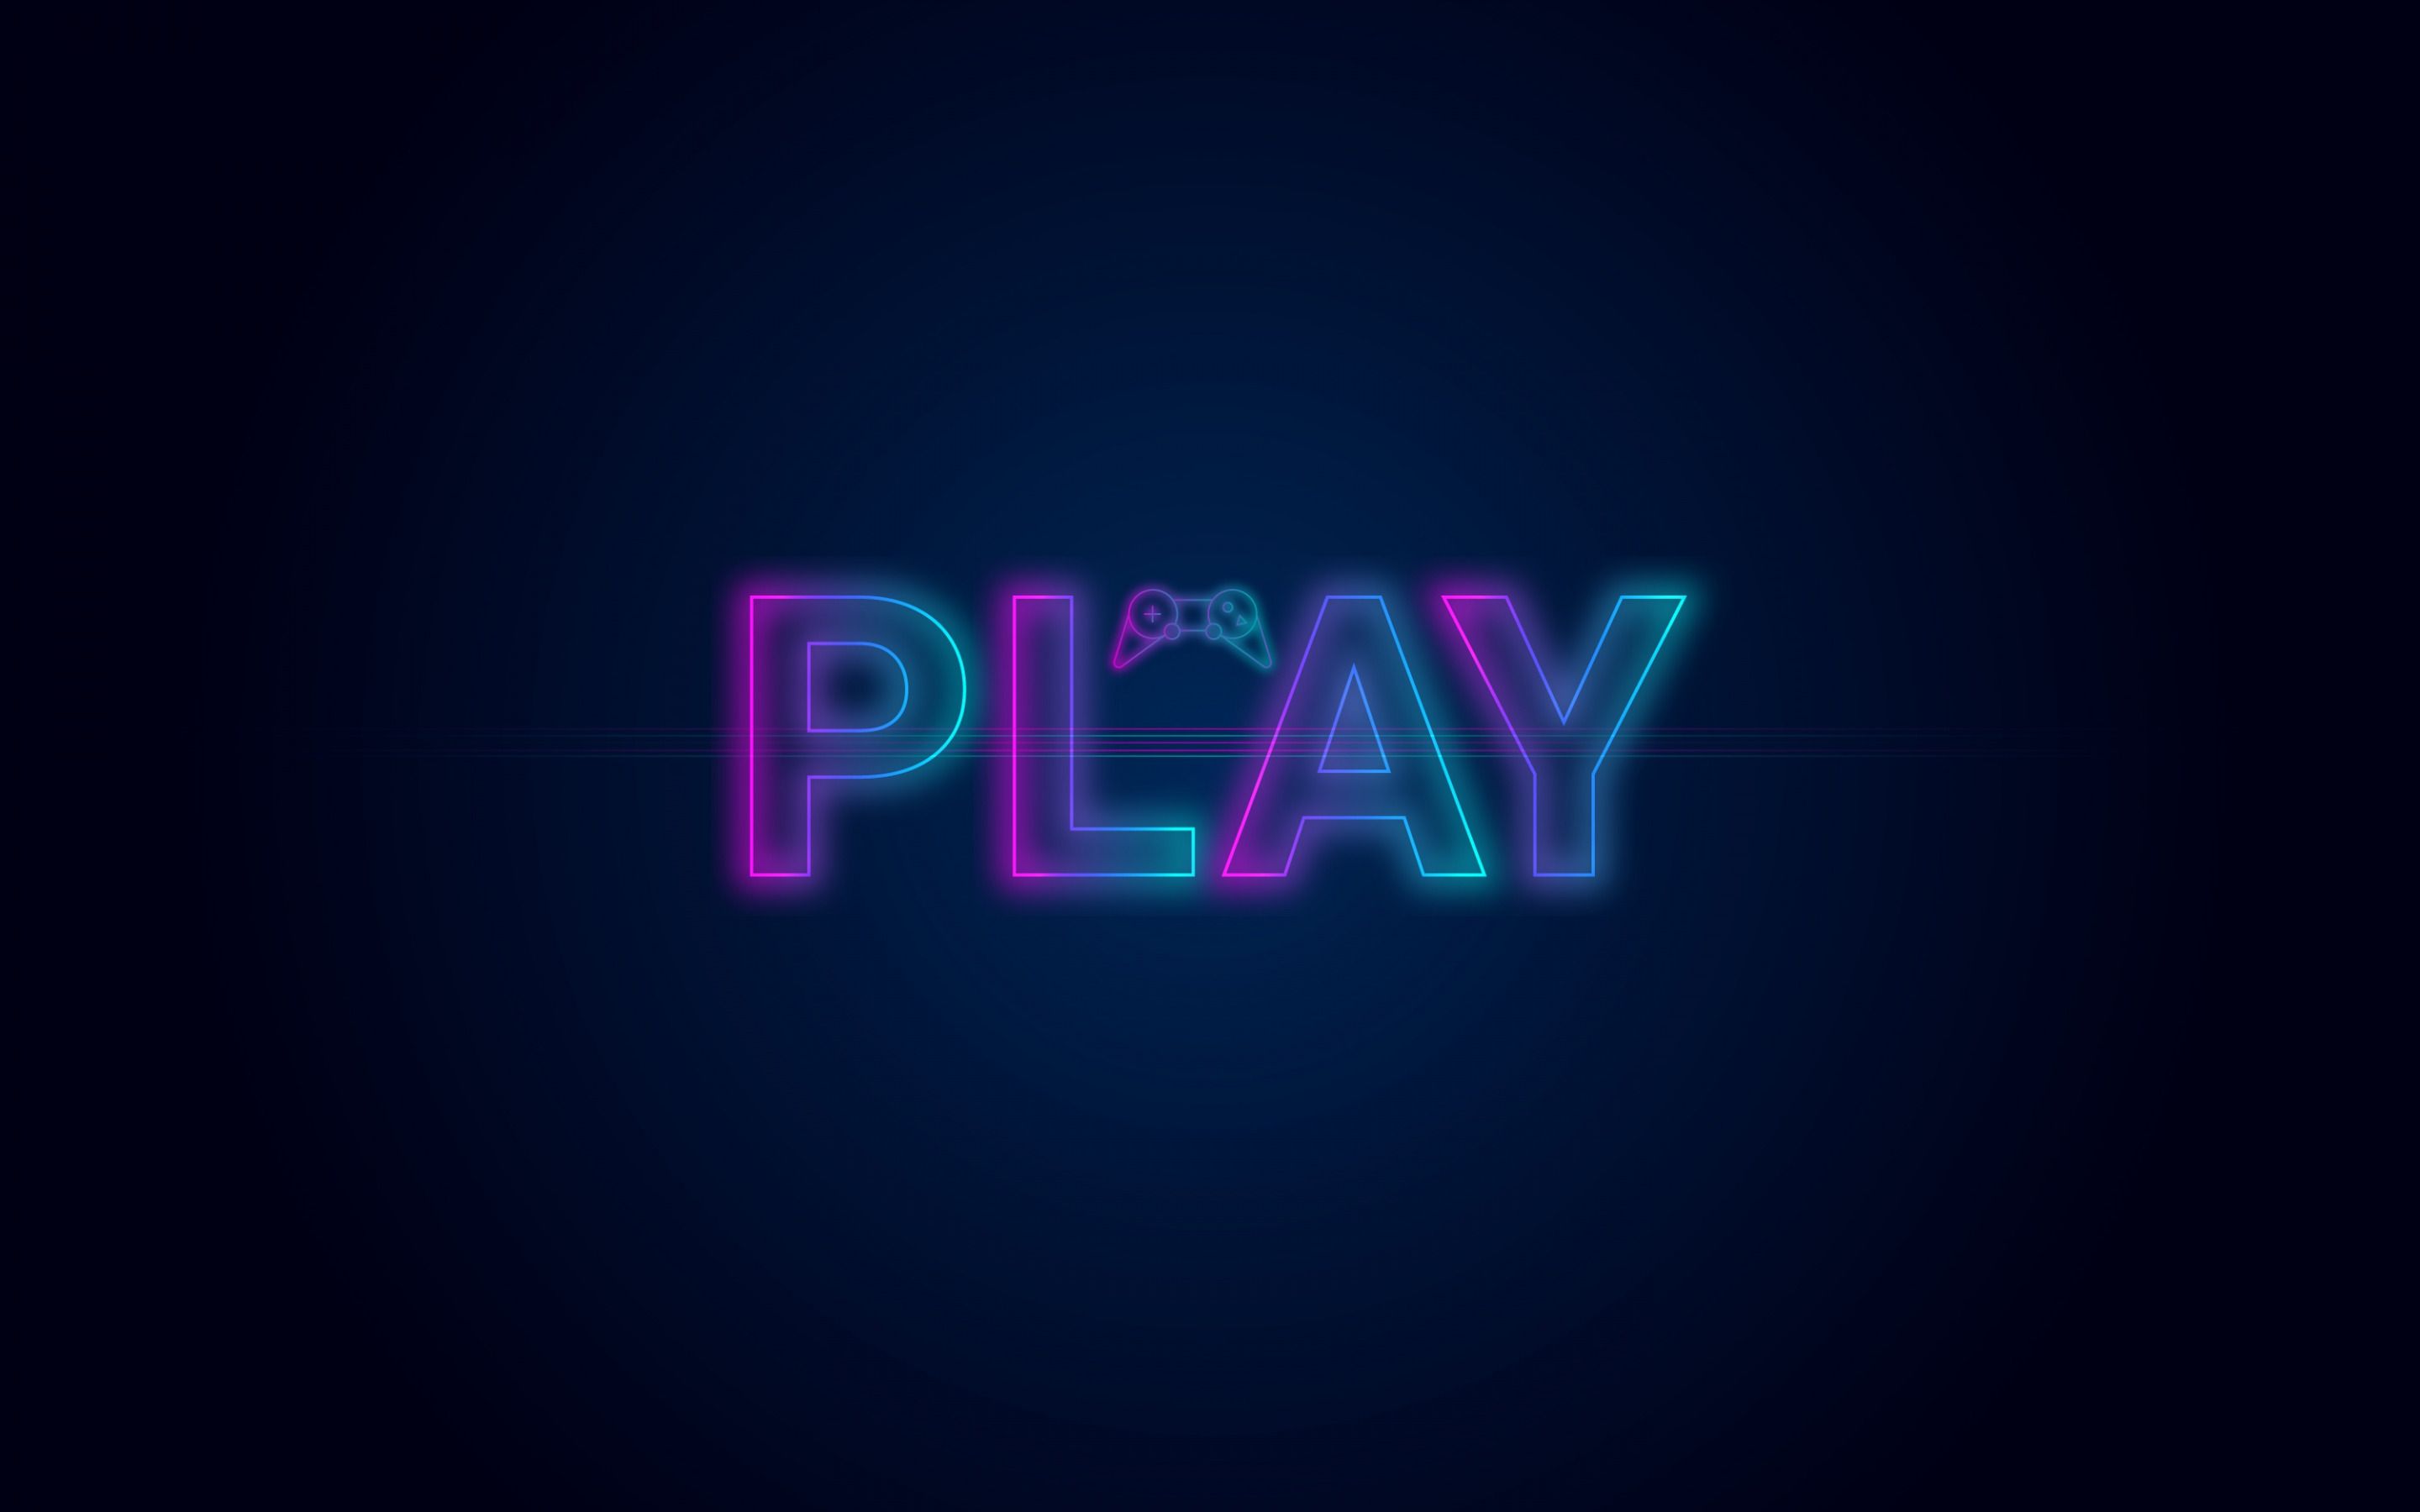 Download wallpaper Play, video game, Play concepts, PlayStation, neon light logo, blue background, PS4 concepts, game console for desktop with resolution 2880x1800. High Quality HD picture wallpaper